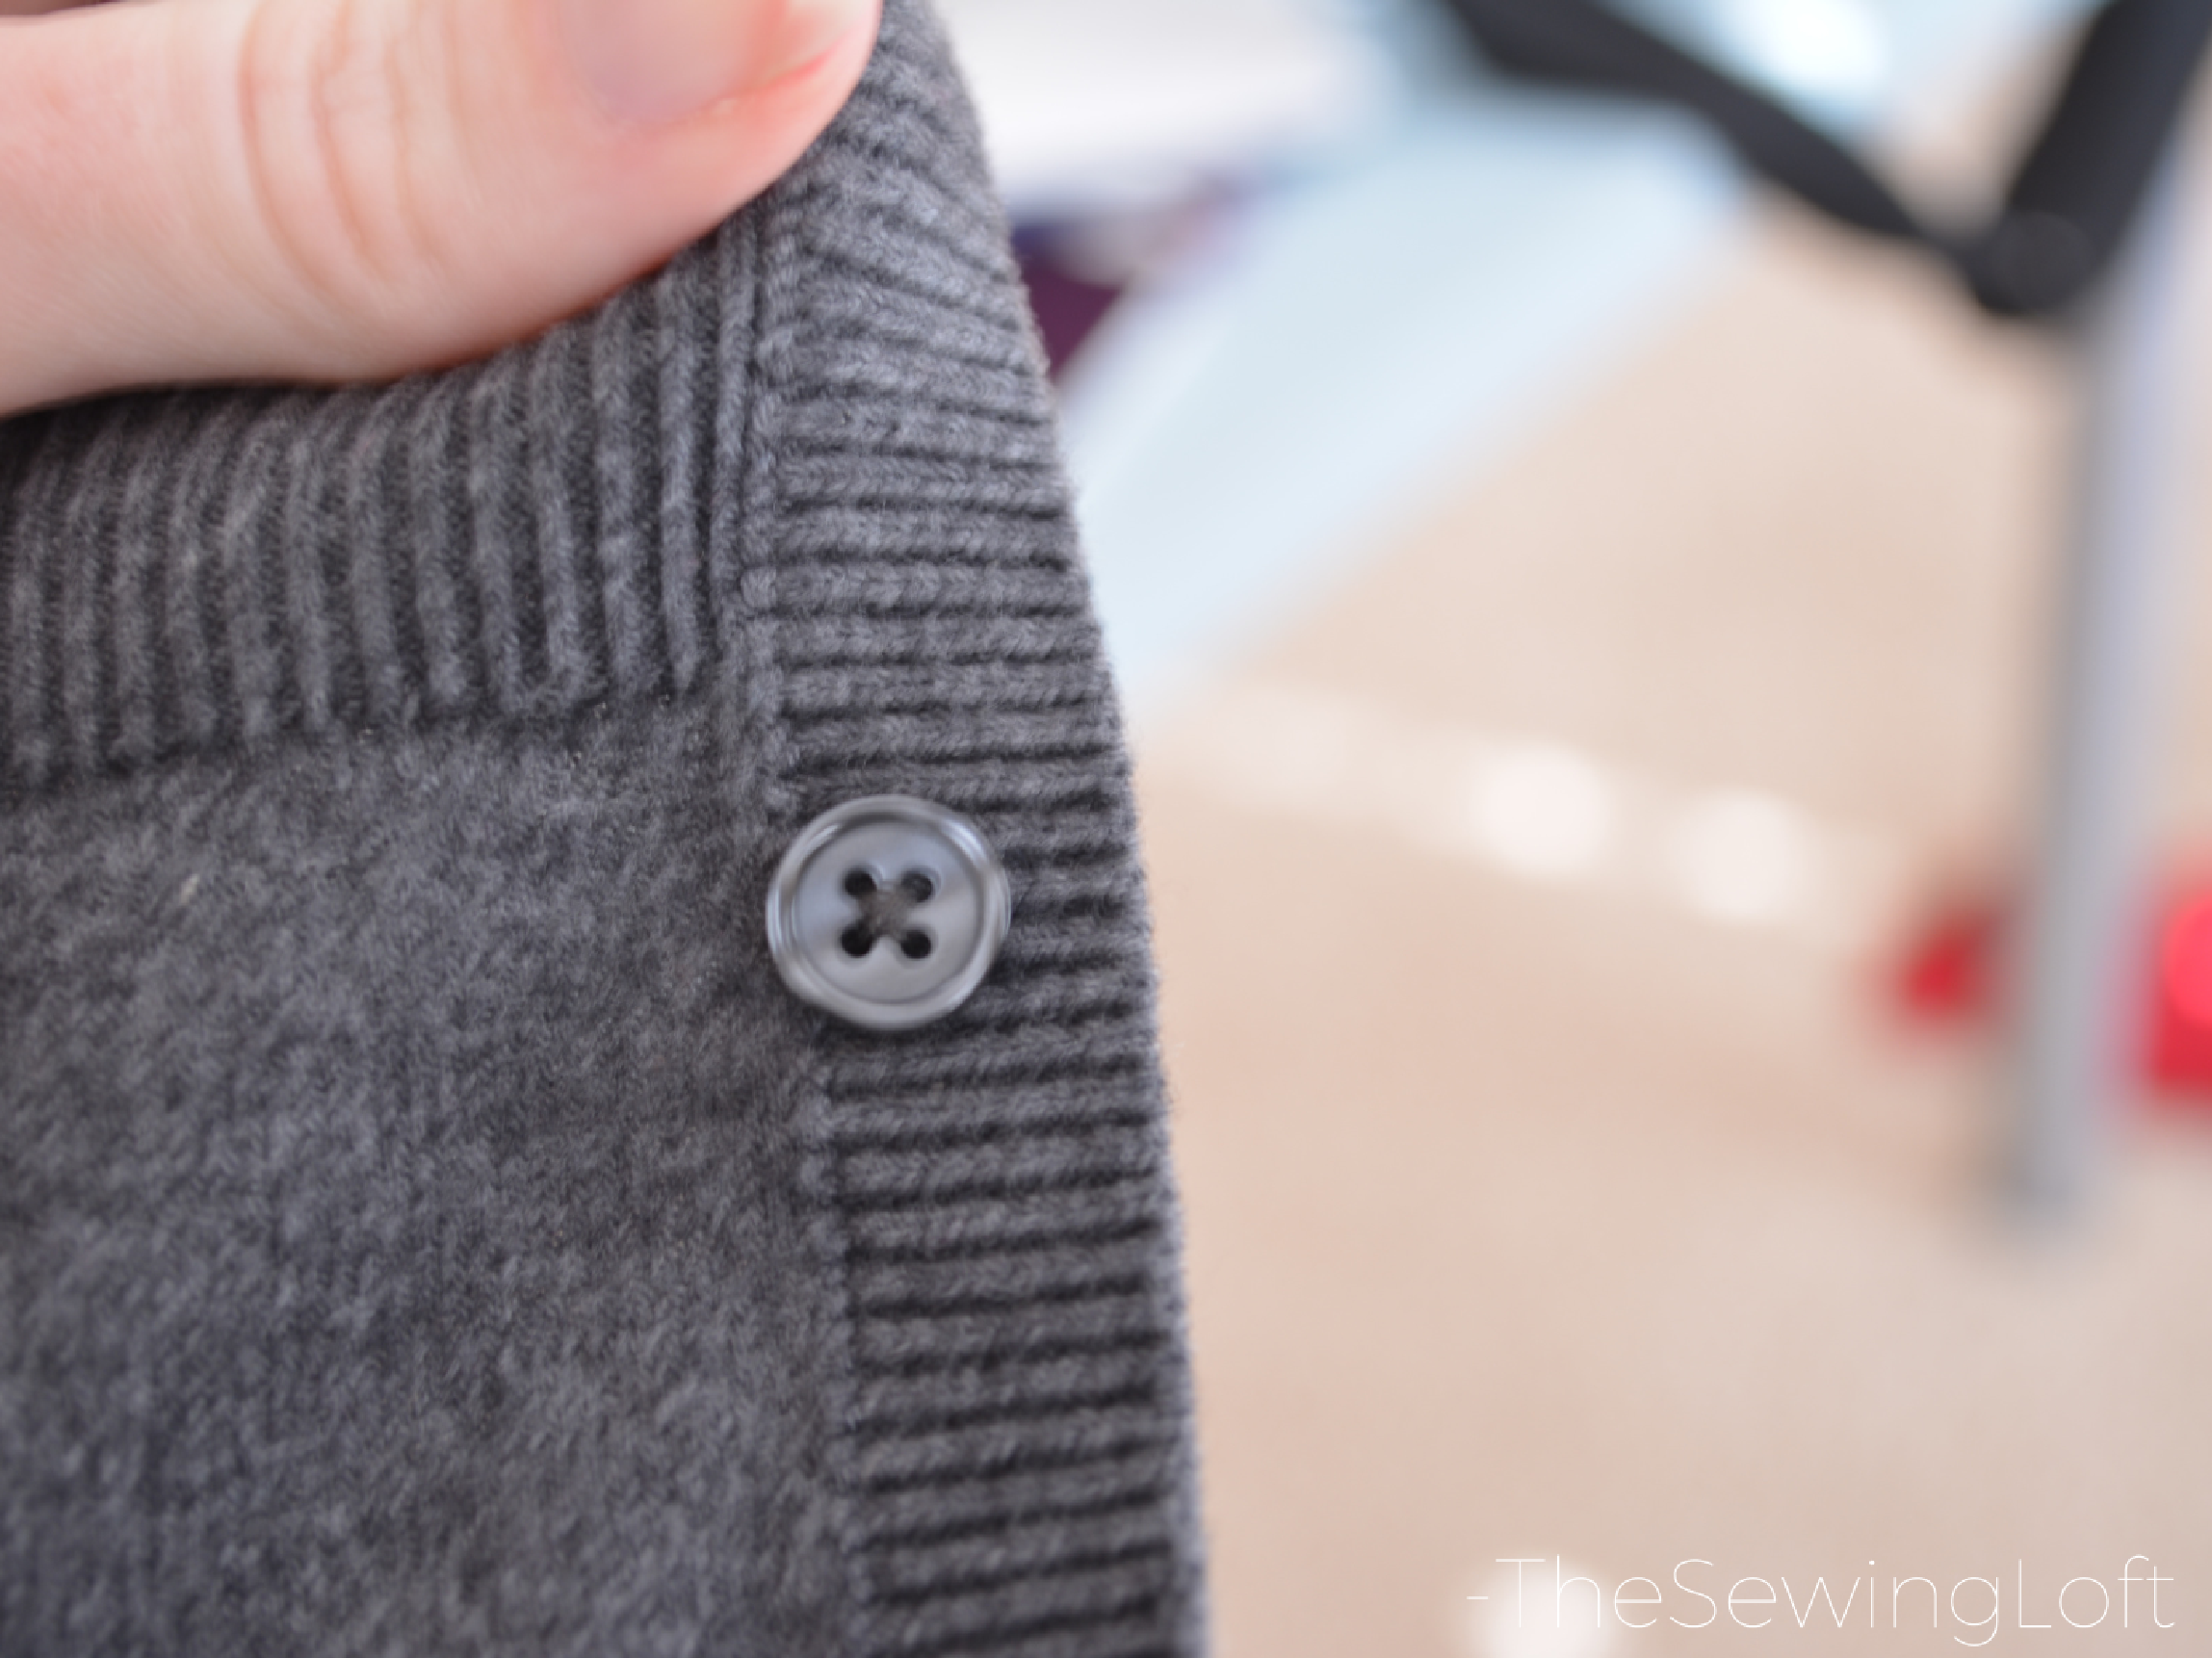 Keep your buttons in place with this easy tip. You can find this and many other sewing tips you should know on The Sewing Loft. 